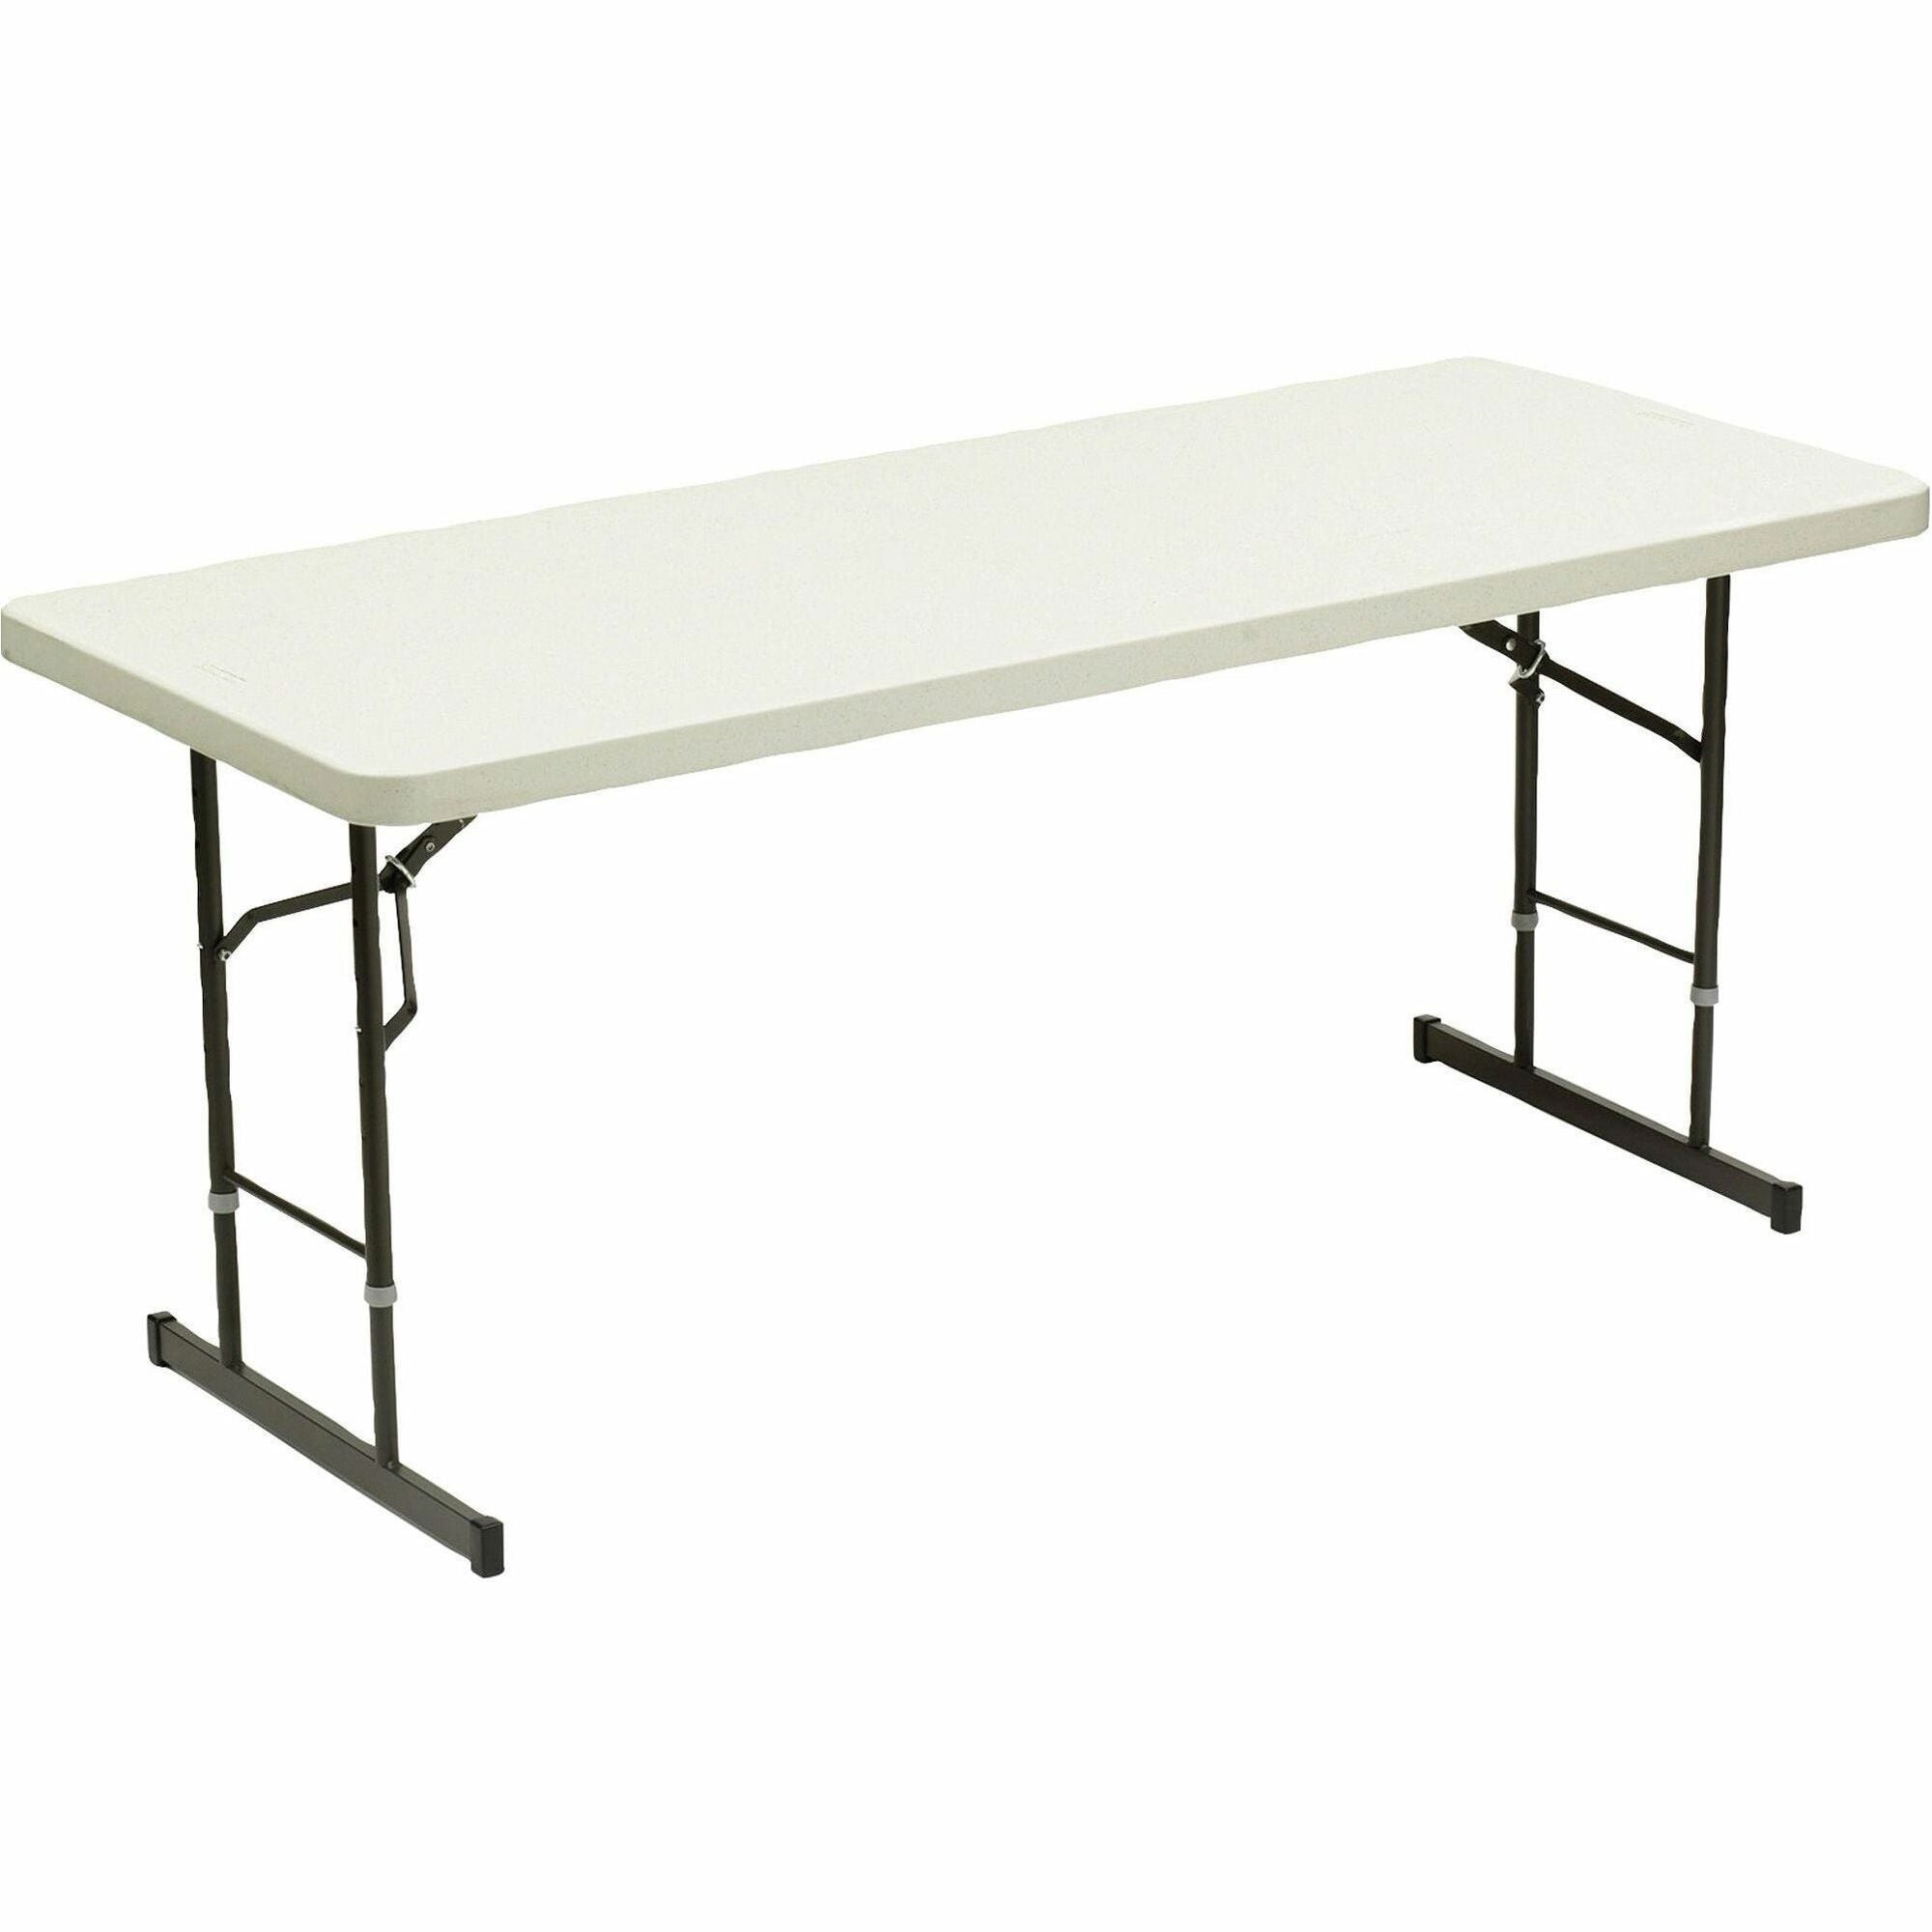 Iceberg IndestrucTable TOO 1200 Series Adjustable Folding Table - For - Table TopRectangle Top - 4 Legs - 600 lb Capacity - Adjustable Height - 25" to 29" Adjustment - 72" Table Top Length x 30" Table Top Width x 2" Table Top Thickness - 29" Height - - 